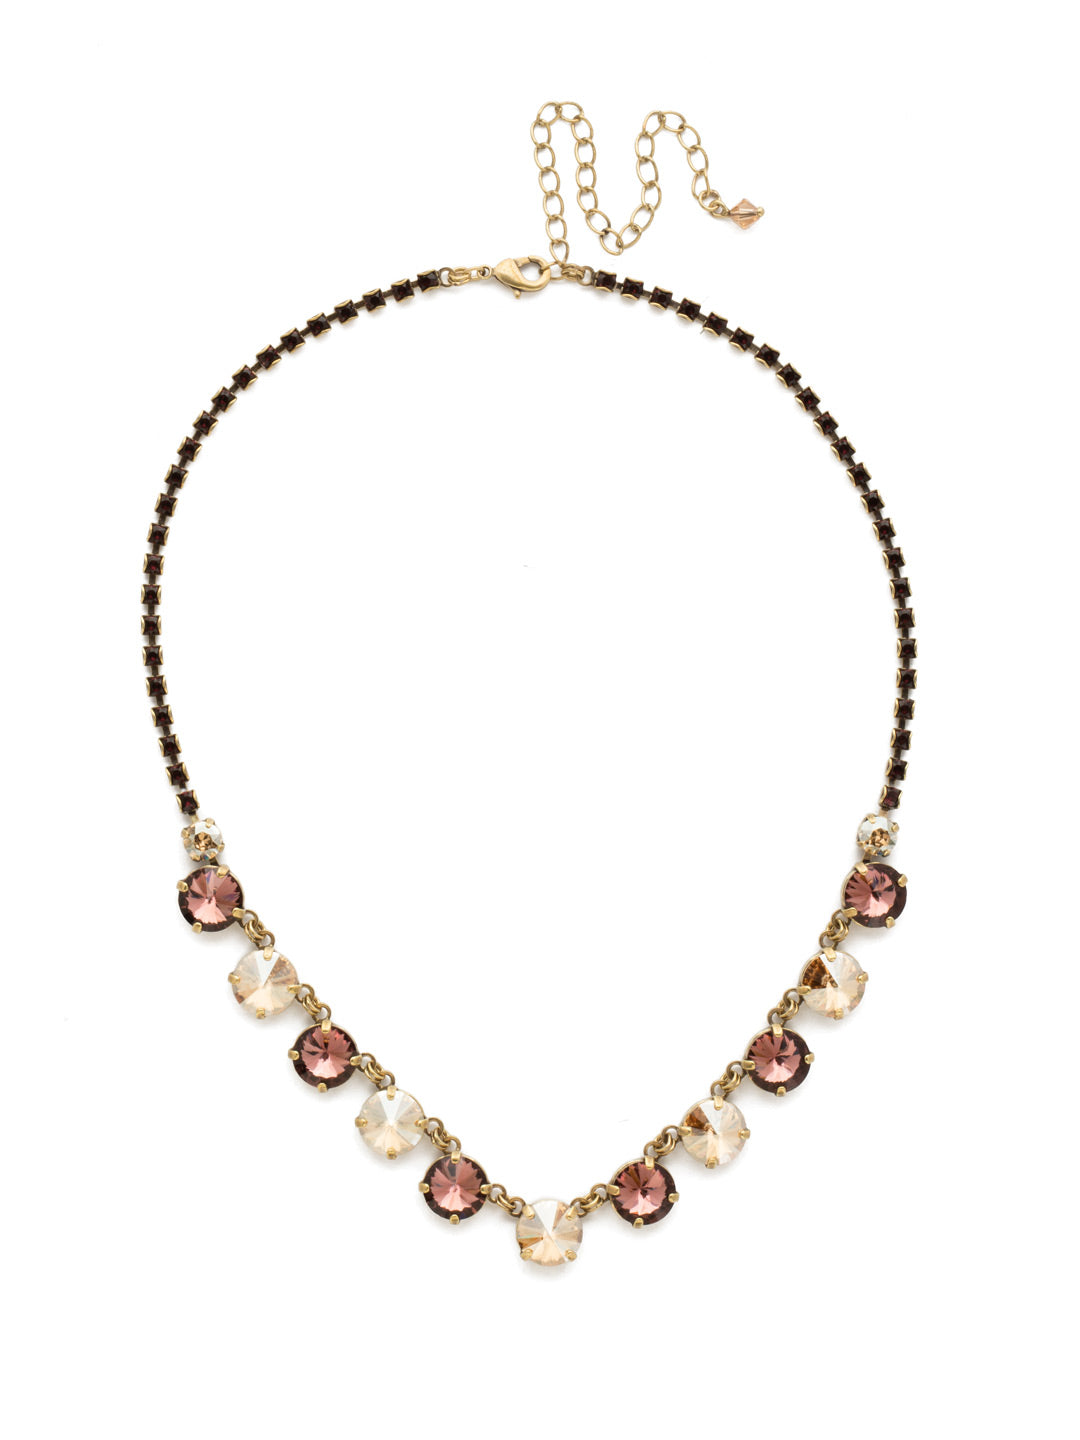 Simply Sophisticated Line Necklace - NDK6AGMMA